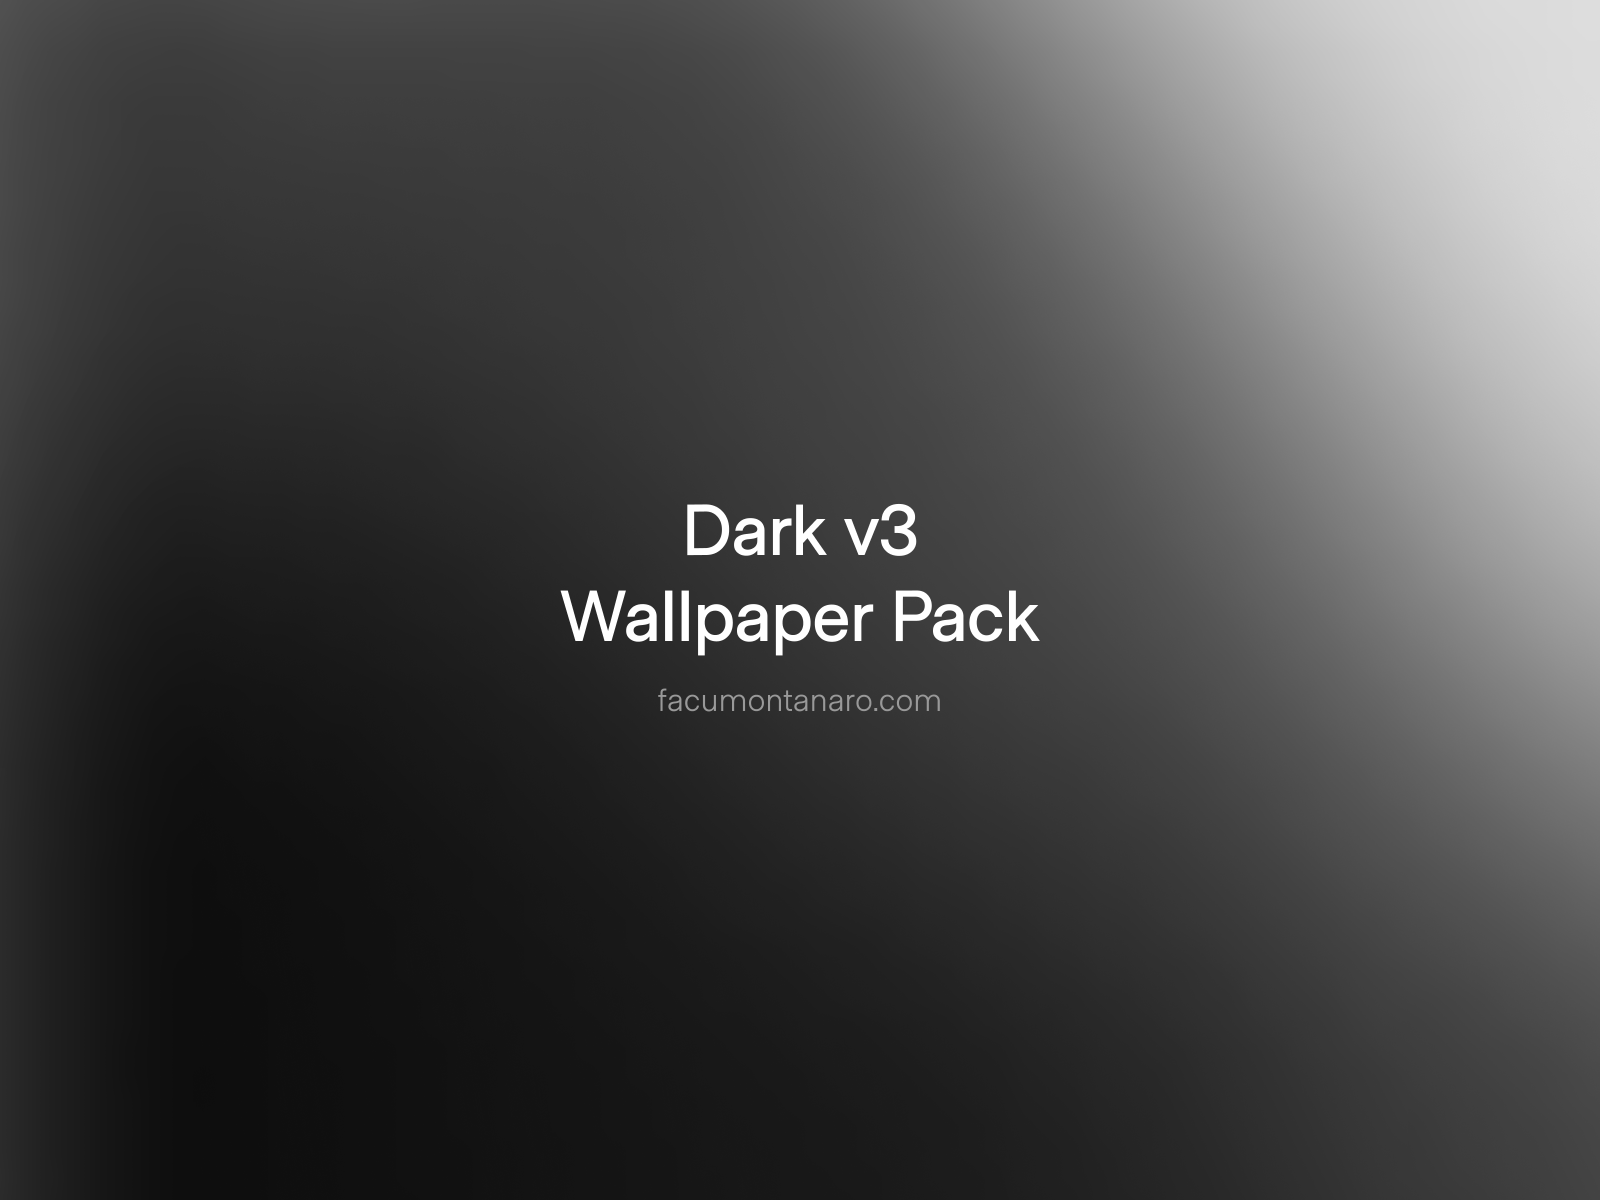 Dark v3 - Wallpapers Pack by Facu Montanaro on Dribbble